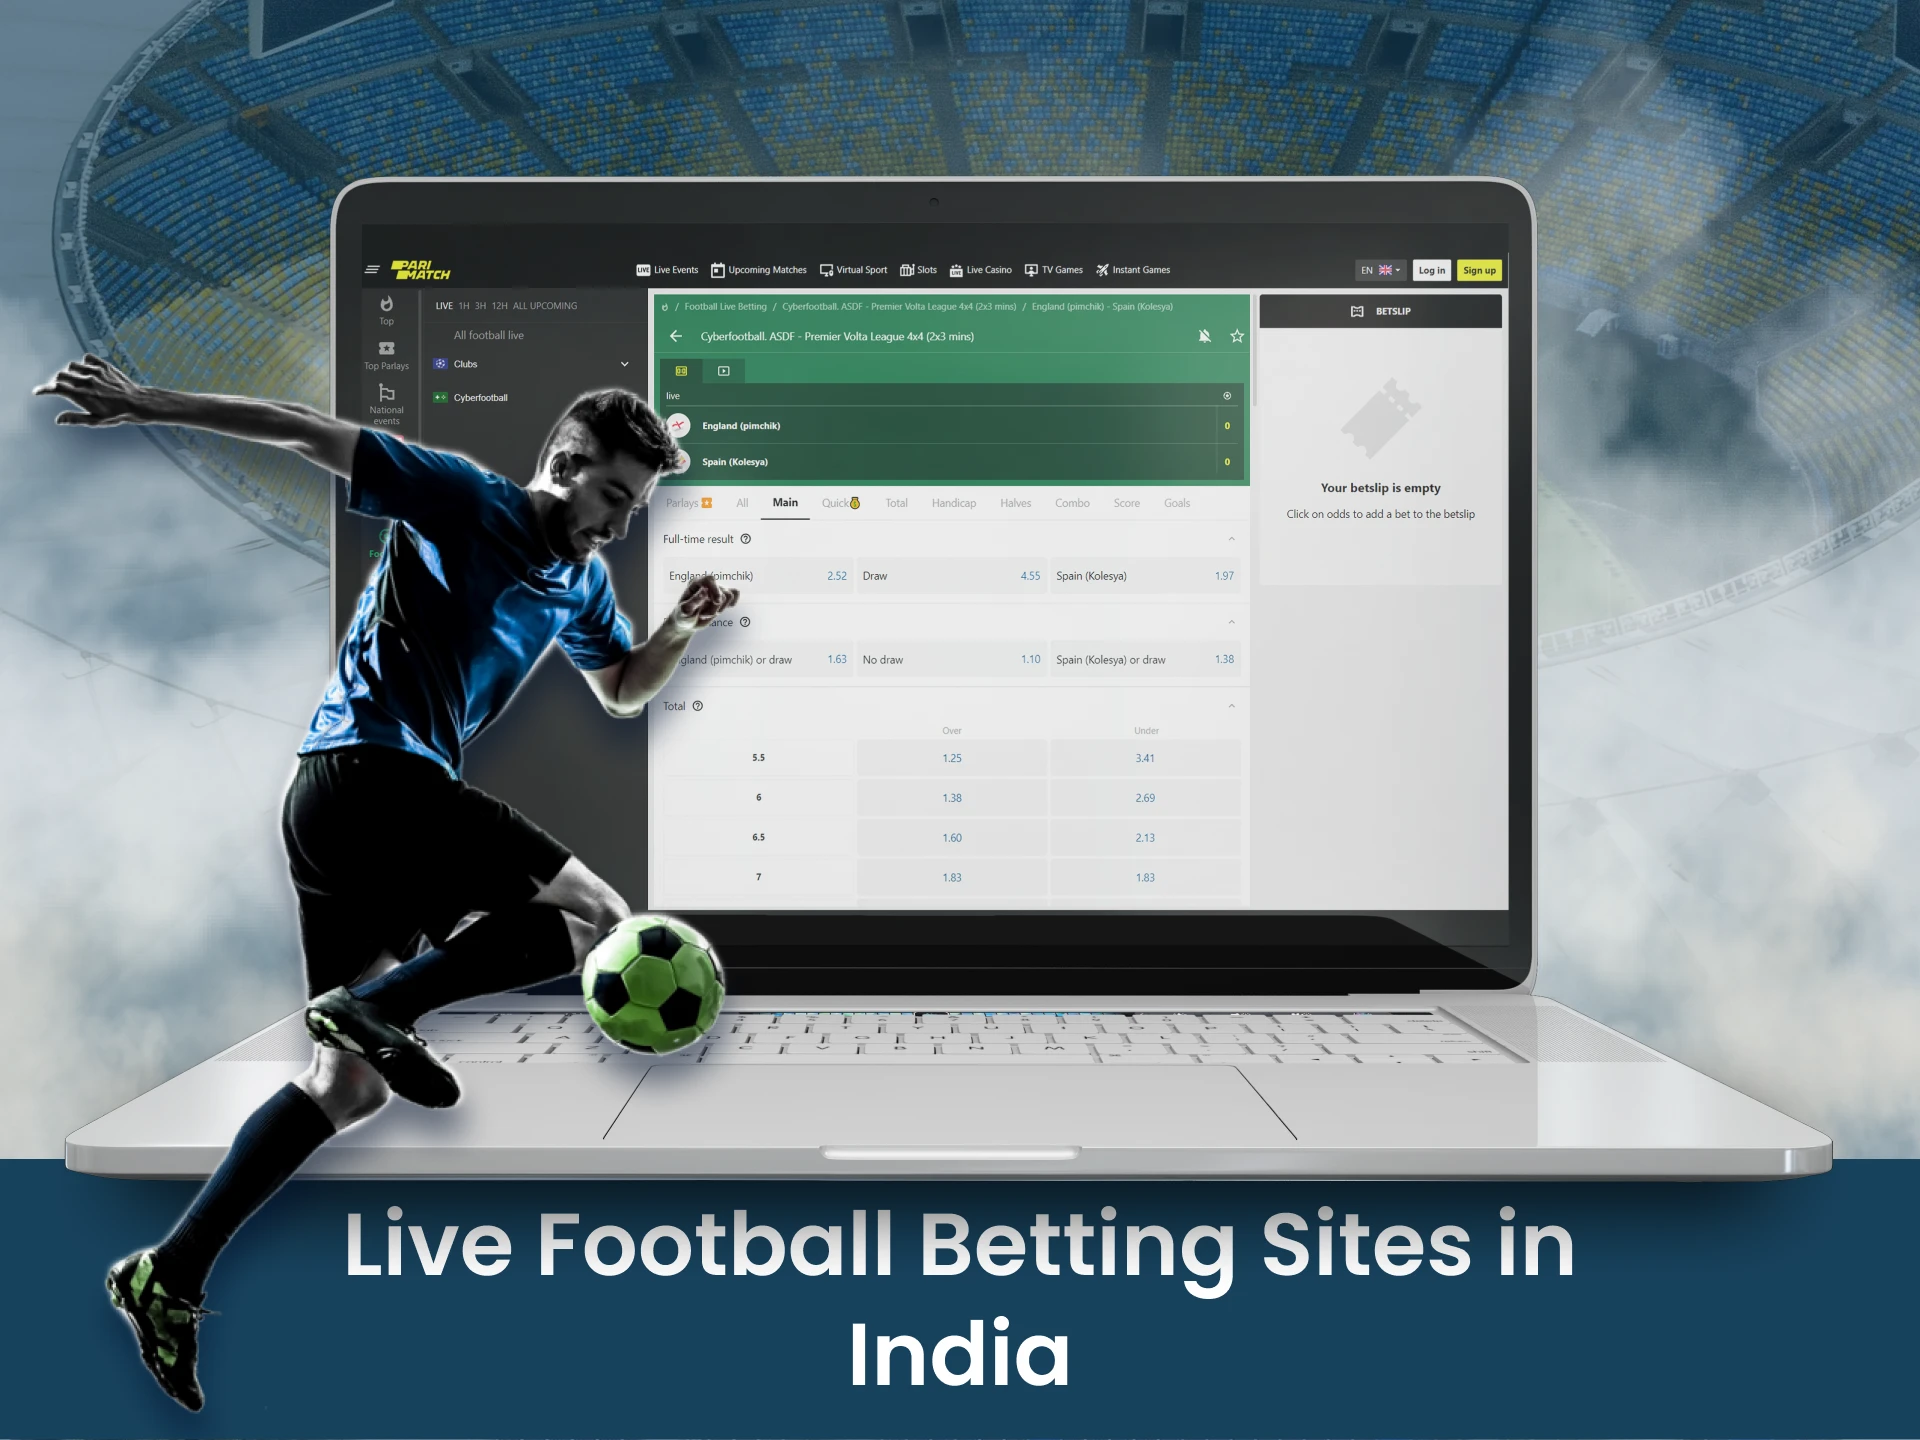 Place bets during the football matches on these betting websites.